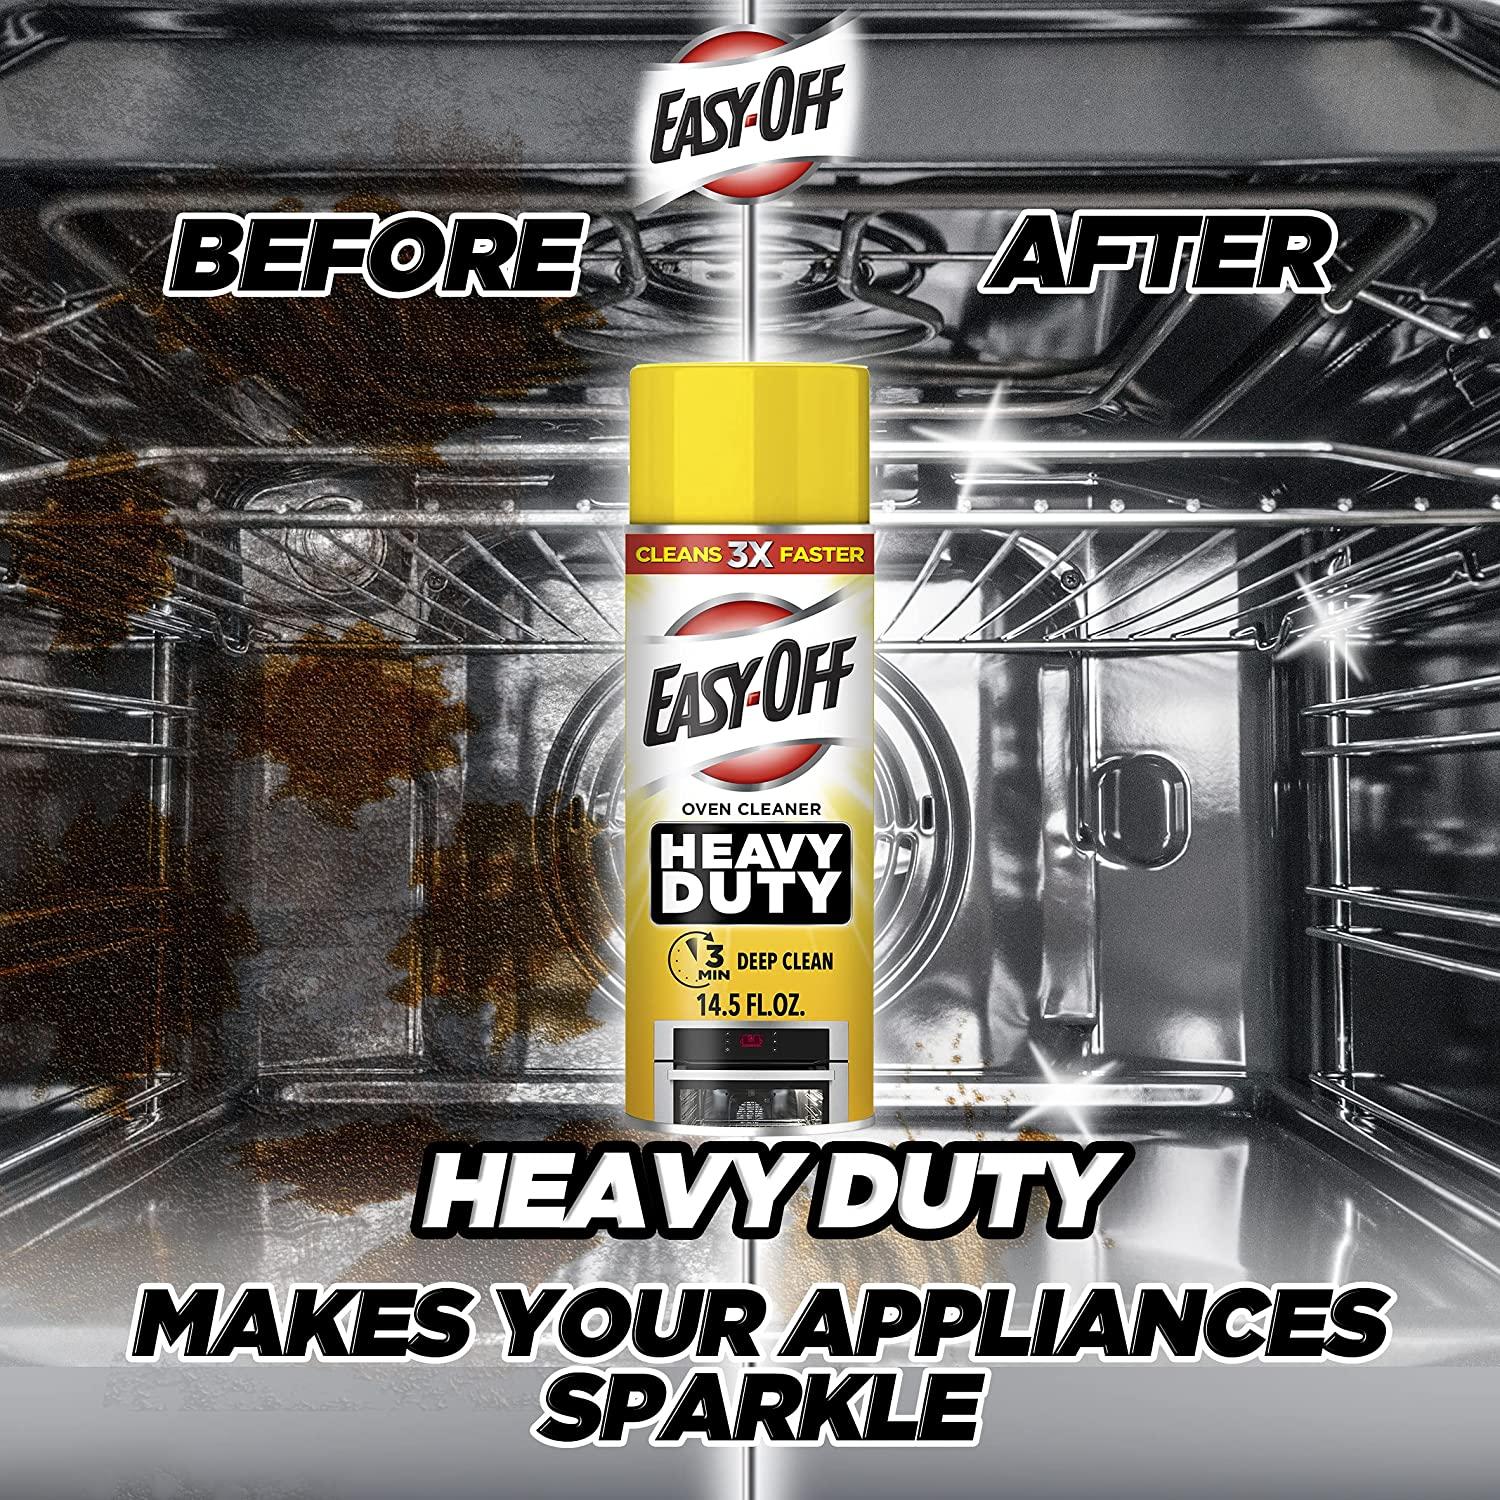 Easy-Off Oven Heavy Duty